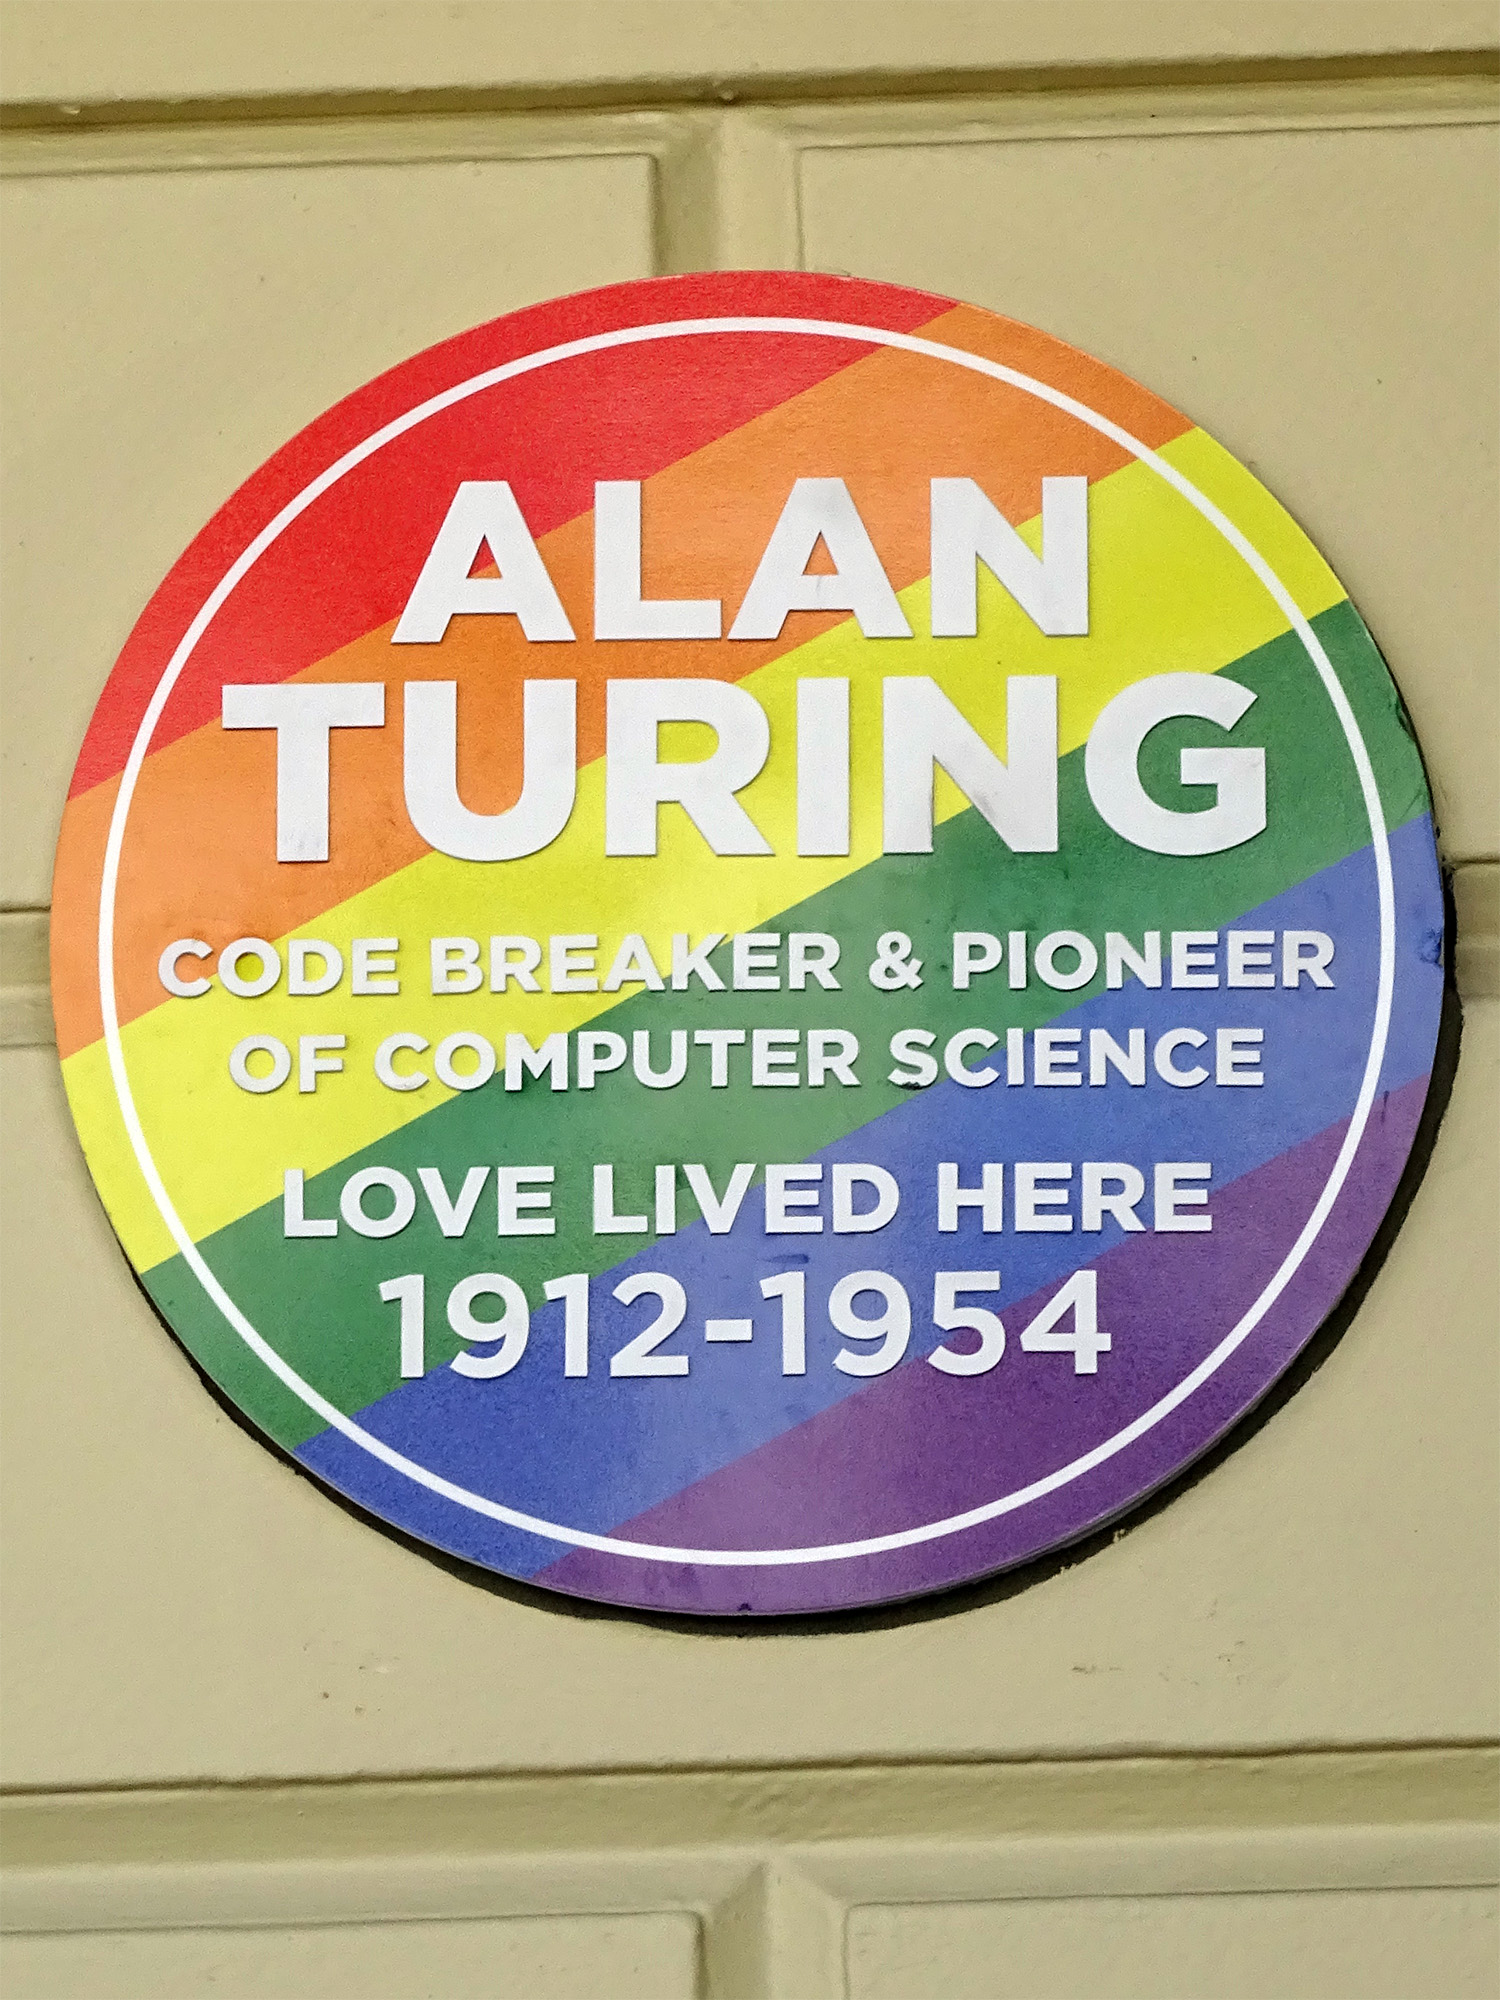 Alan Turing: Mathematician, computer pioneer and wartime code breaker -  Discovery Place Science Museum